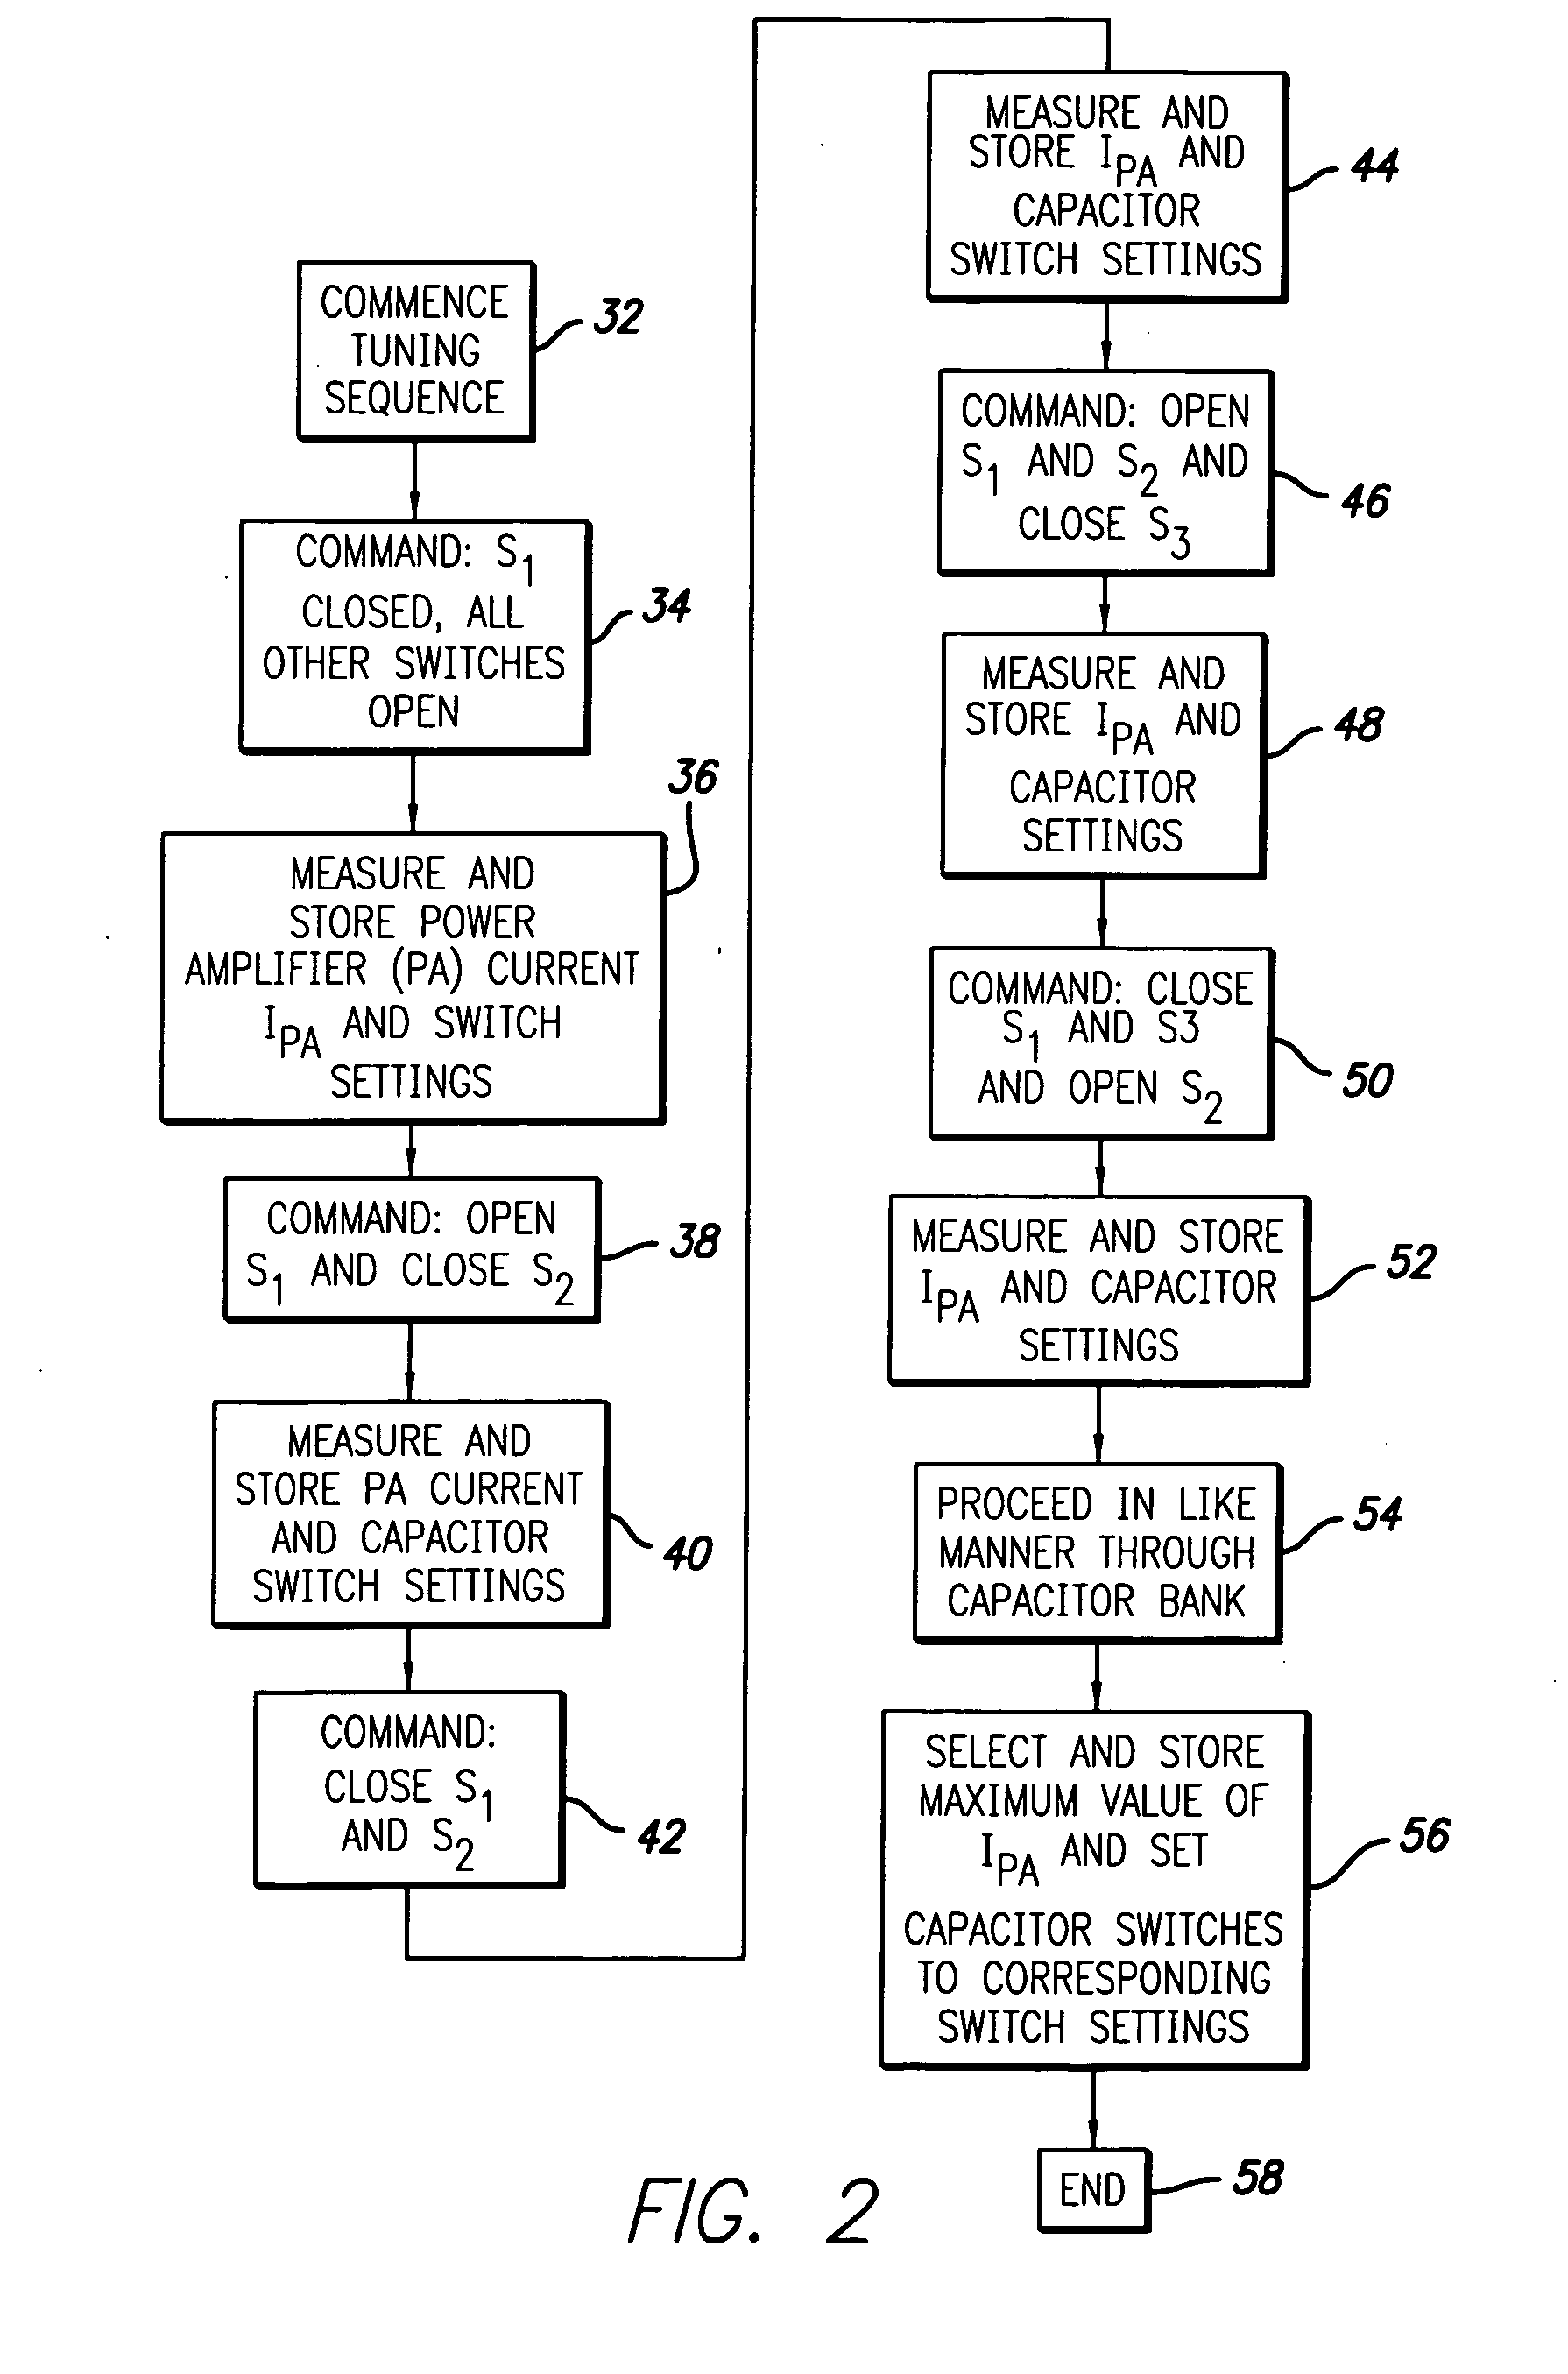 System and method for automatic tuning of a magnetic field generator